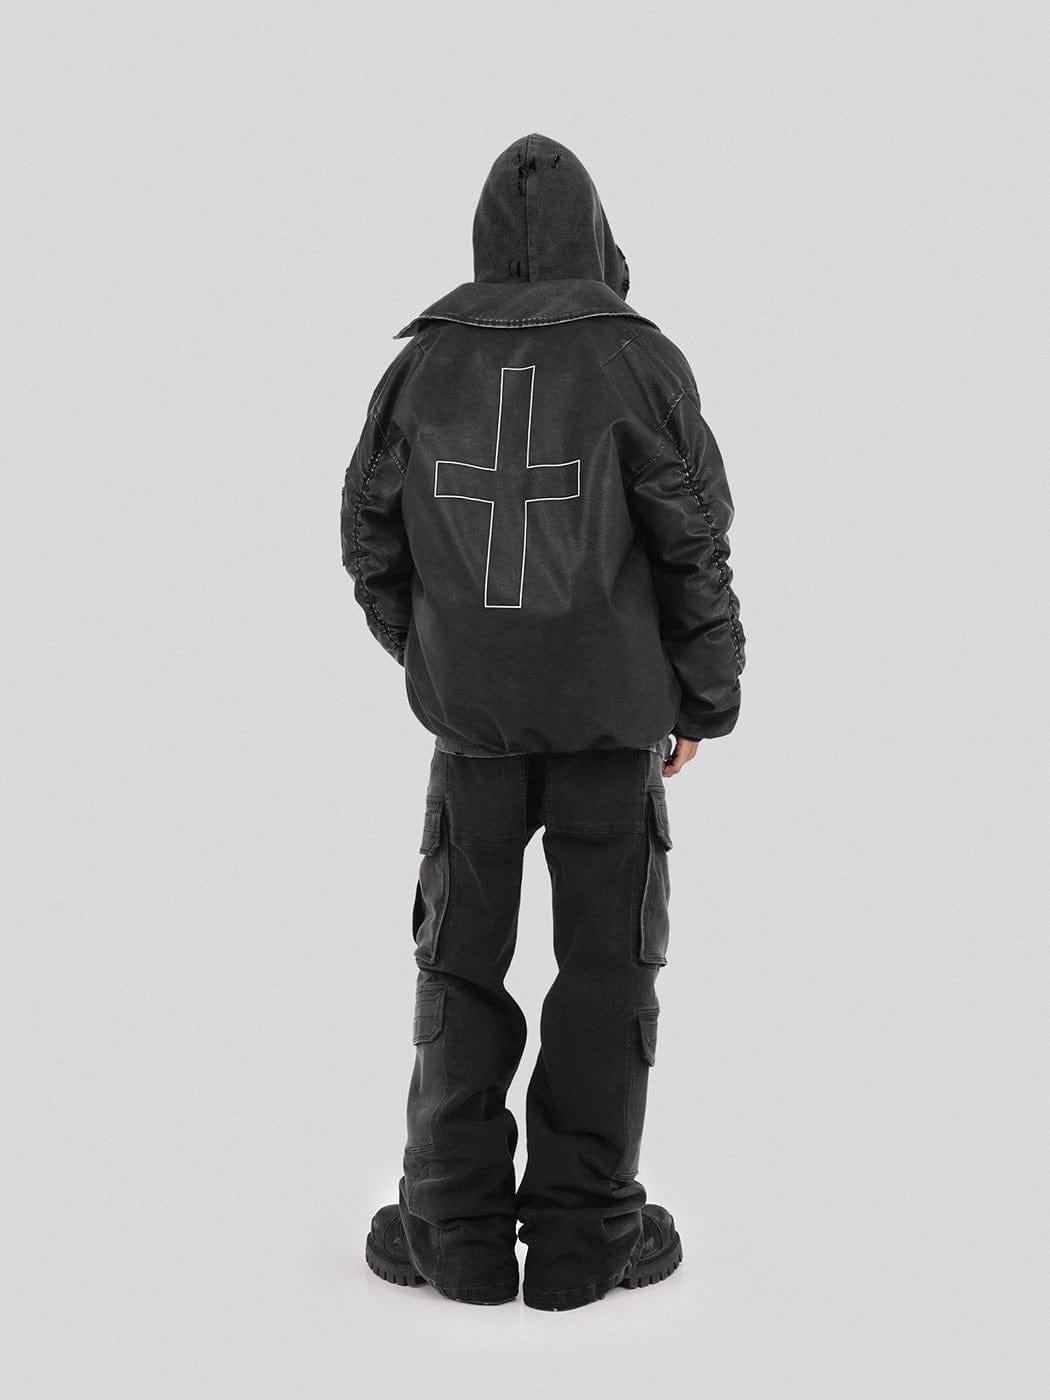 UNDERWATER Crucifix Ripped Faux Leather Down Jacket, premium urban and streetwear designers apparel on PROJECTISR.com, UNDERWATER